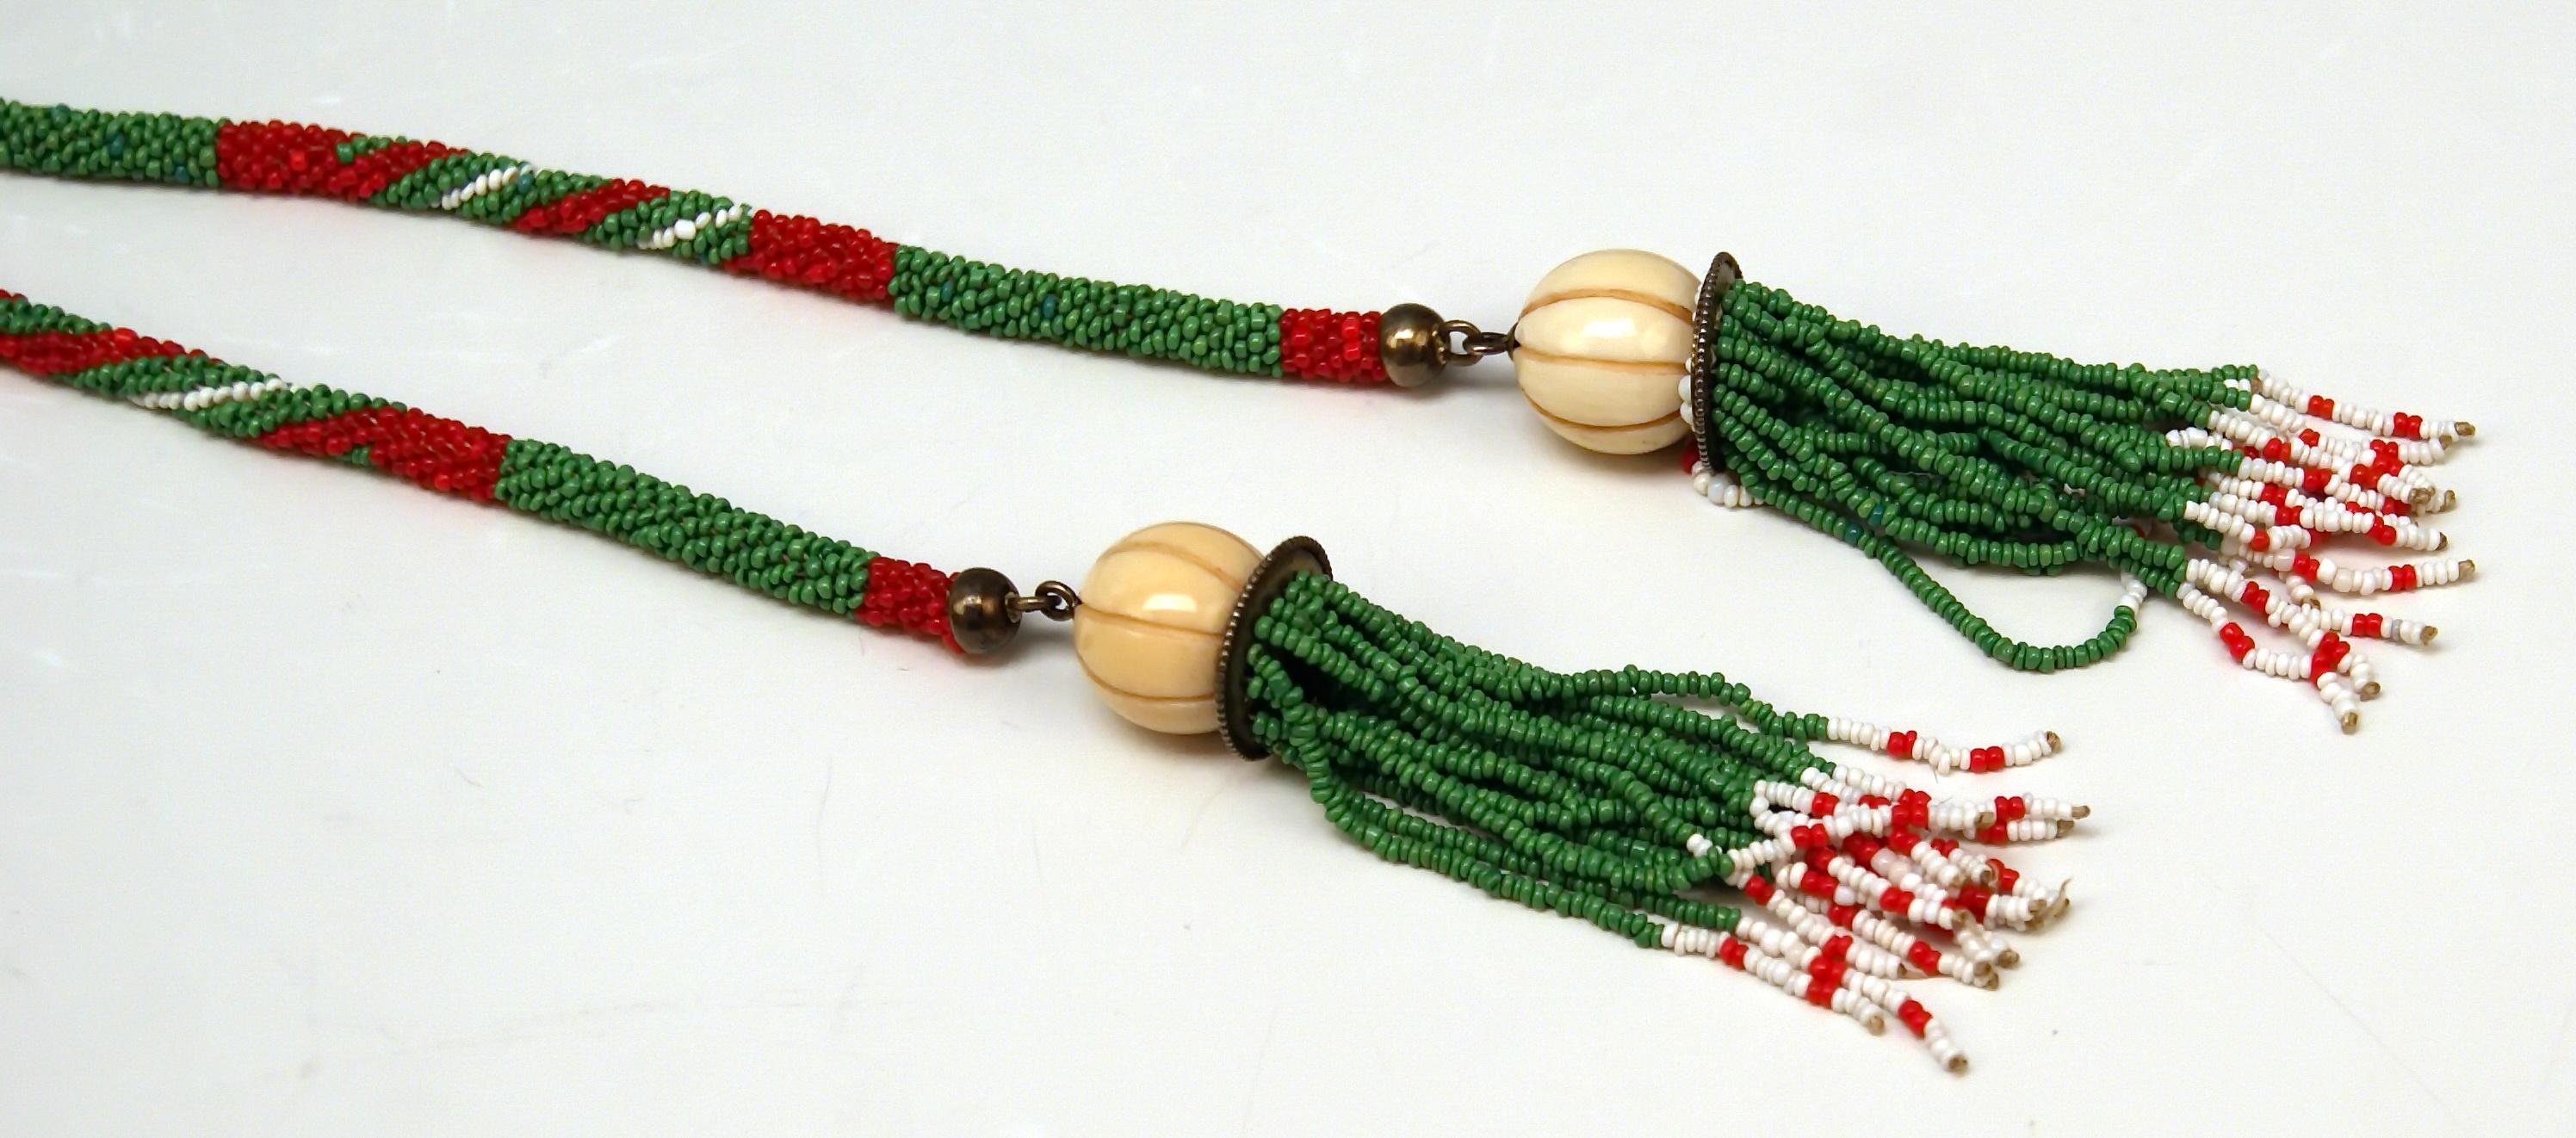 RARE ITEM OF THE WIENER WERKSTAETTE (WW):  ART DECO NECKLACE / MICRO BEADED
Stunning elegance !  This finest Art Deco necklace consists of various multicolored micro glass pearls, shaded in moss green, white and red. The ends of the necklace are